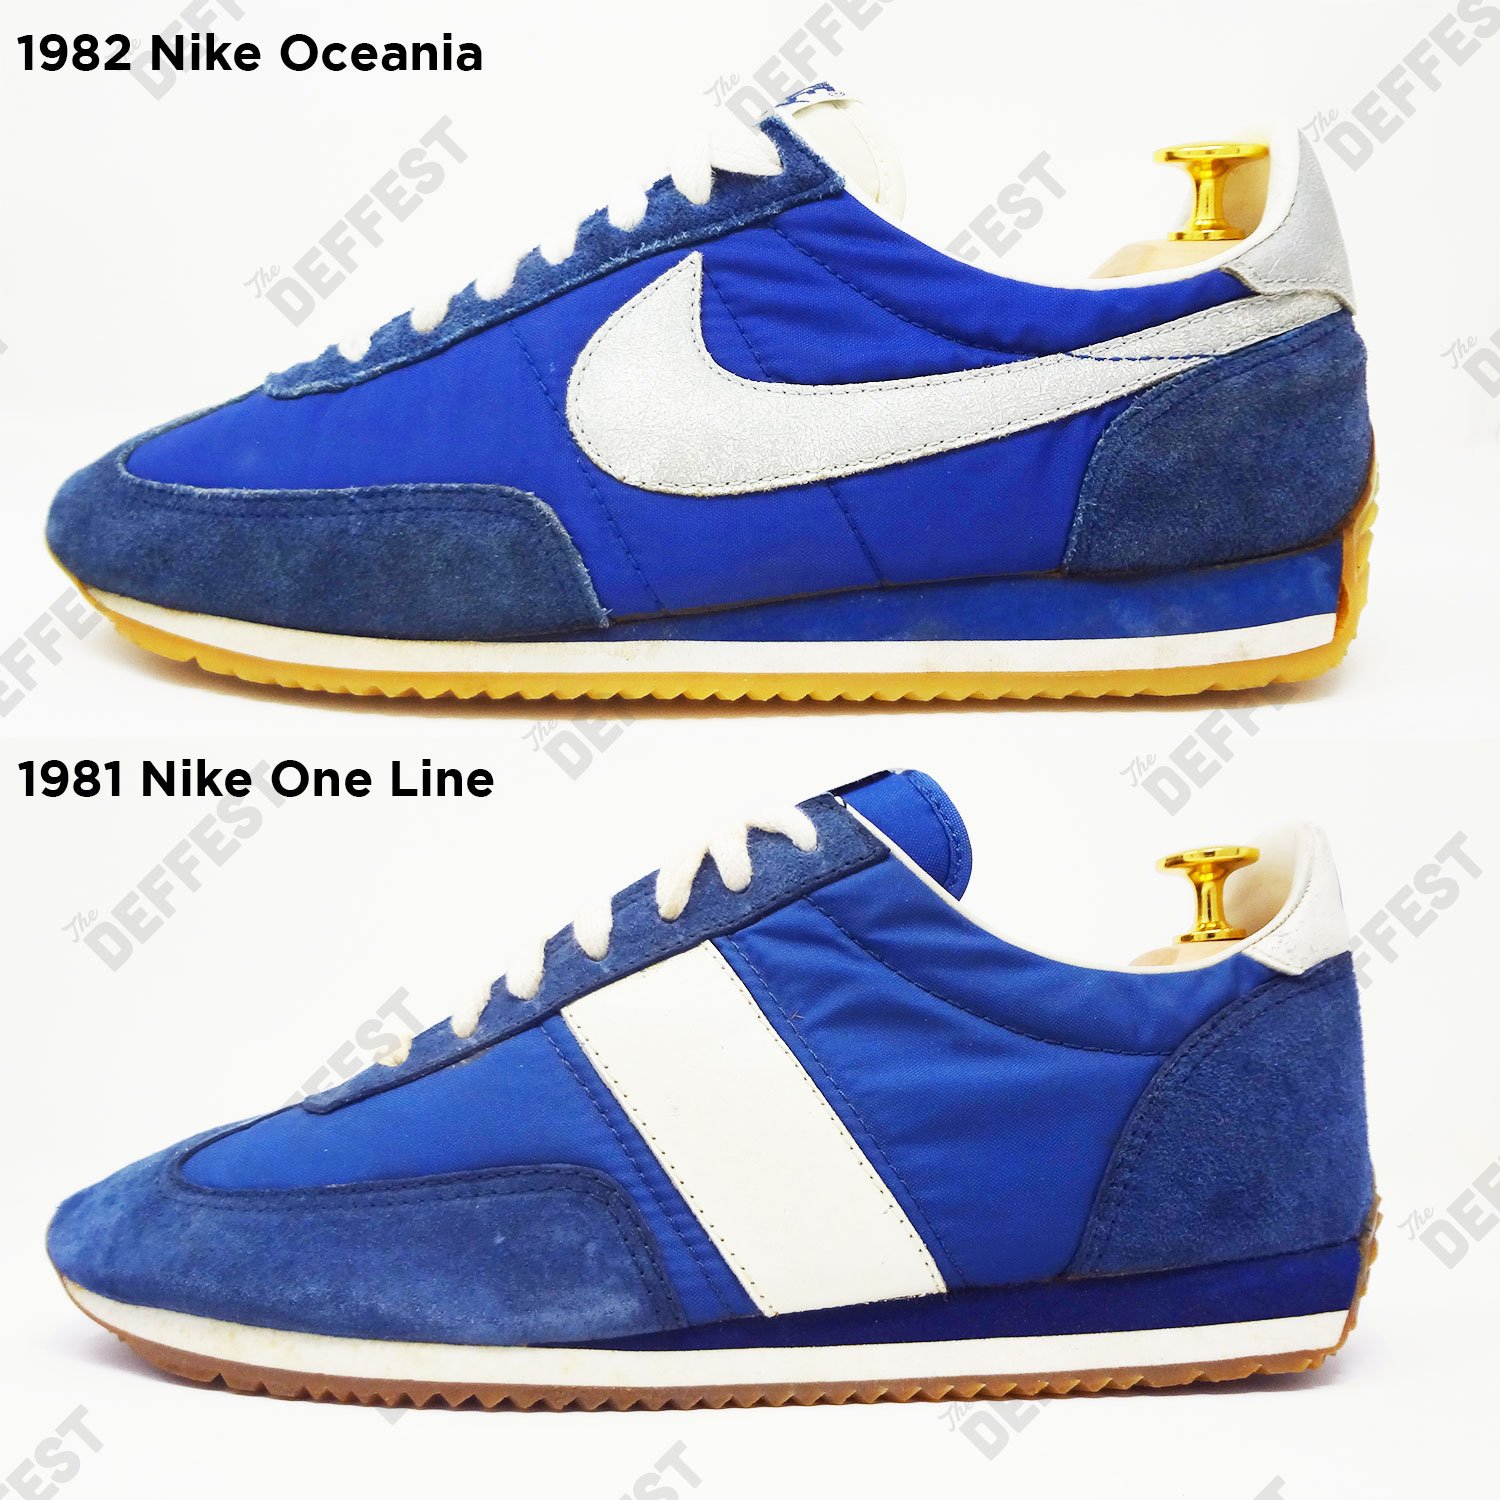 Tag telefonen Tarif Perfekt The Deffest®. A vintage and retro sneaker blog. — The Rarest Nike Shoes  Ever Don't Even Have A Swoosh